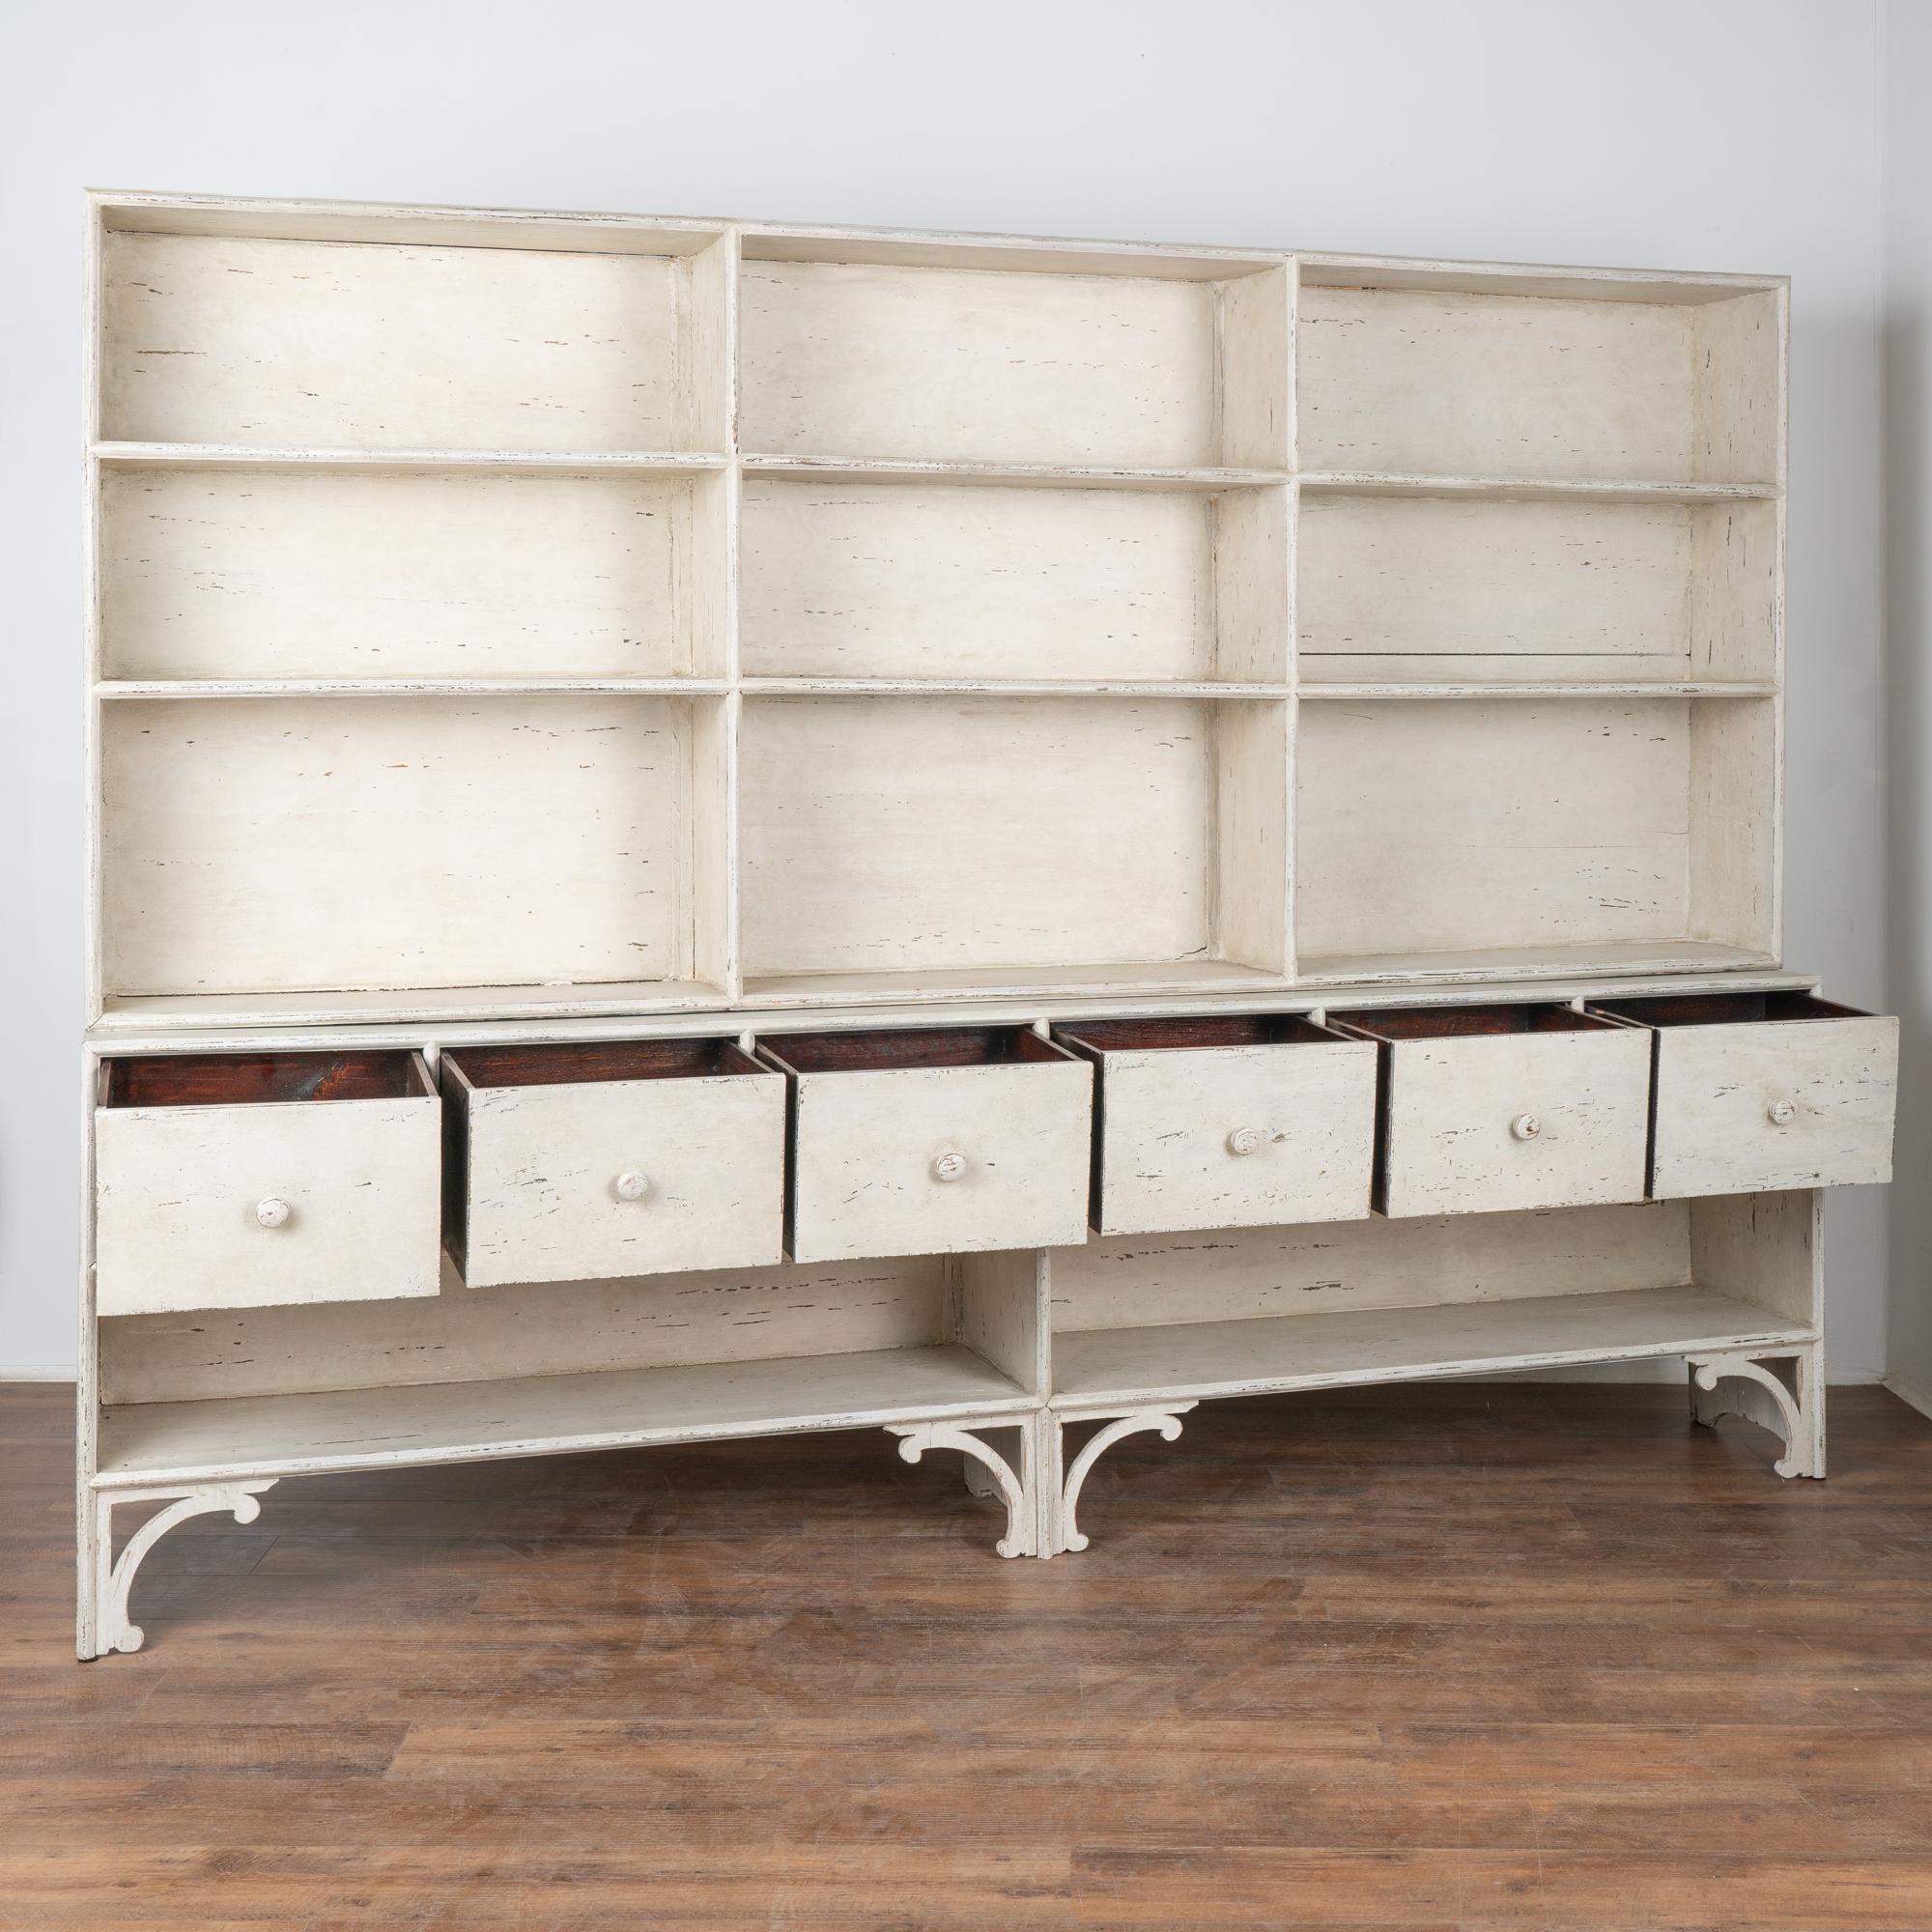 Country Large White Bookcase Cabinet, Denmark circa 1900-20